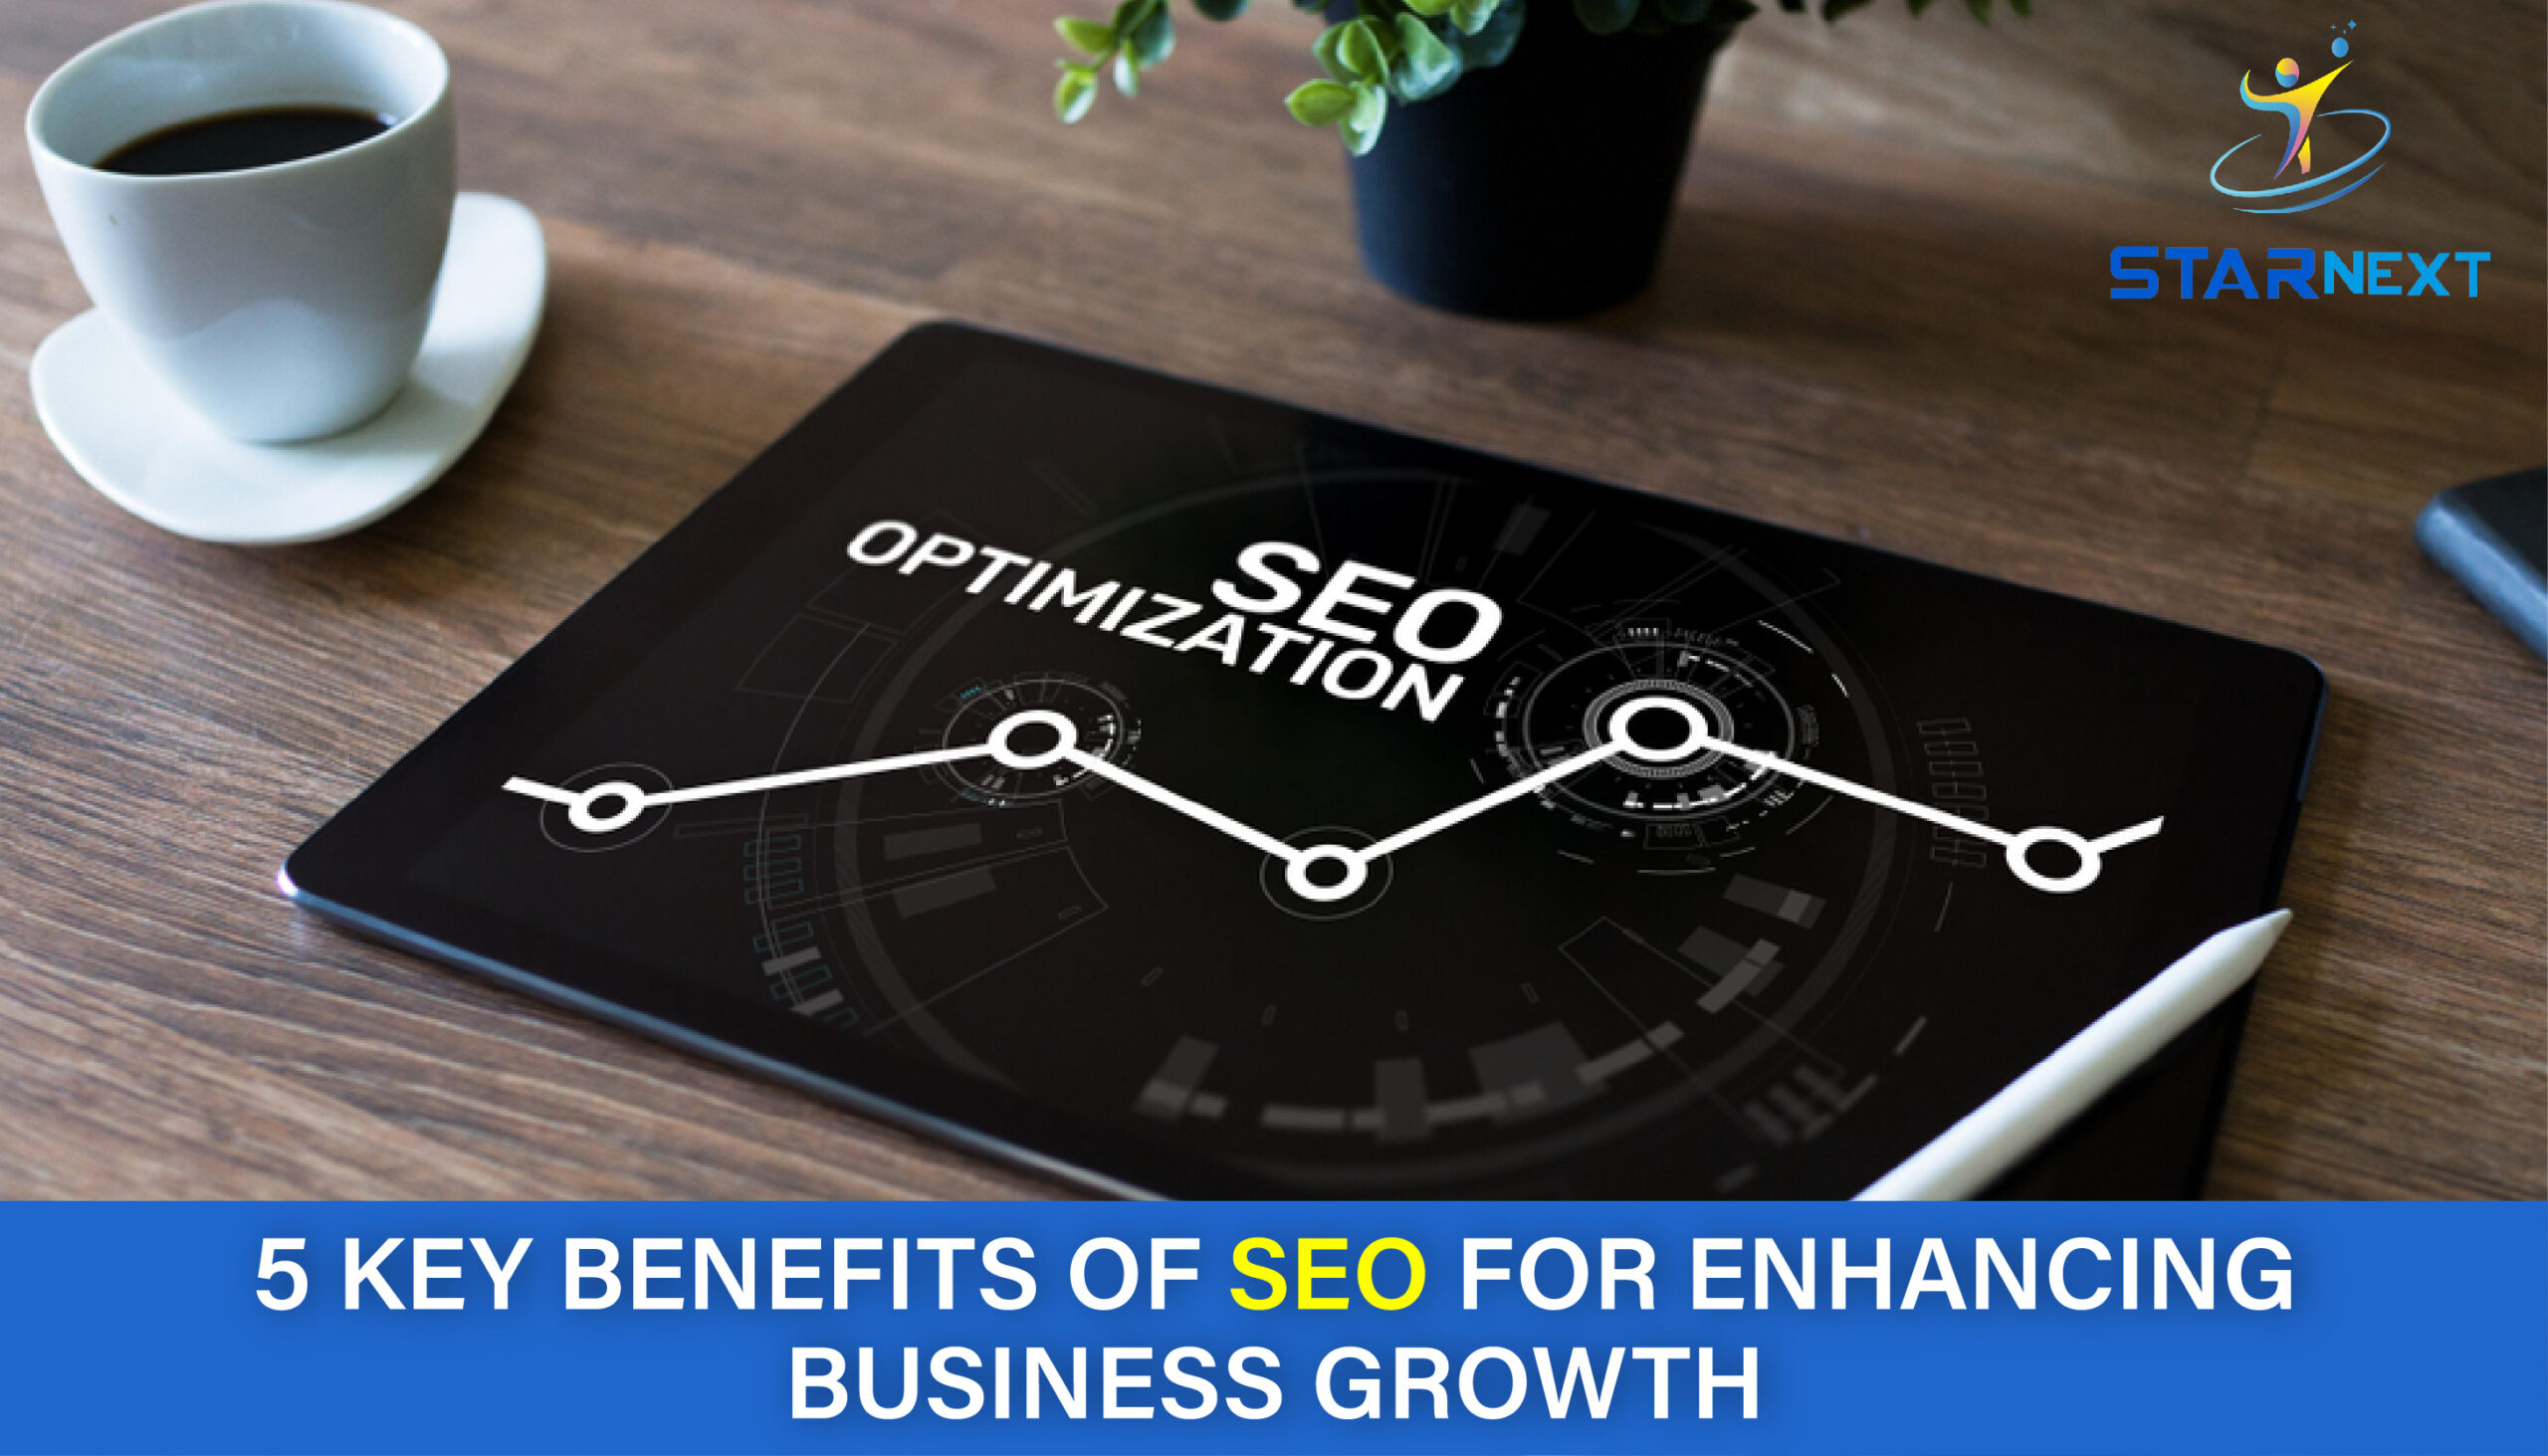 5 Key Benefits of SEO for Enhancing Business Growth